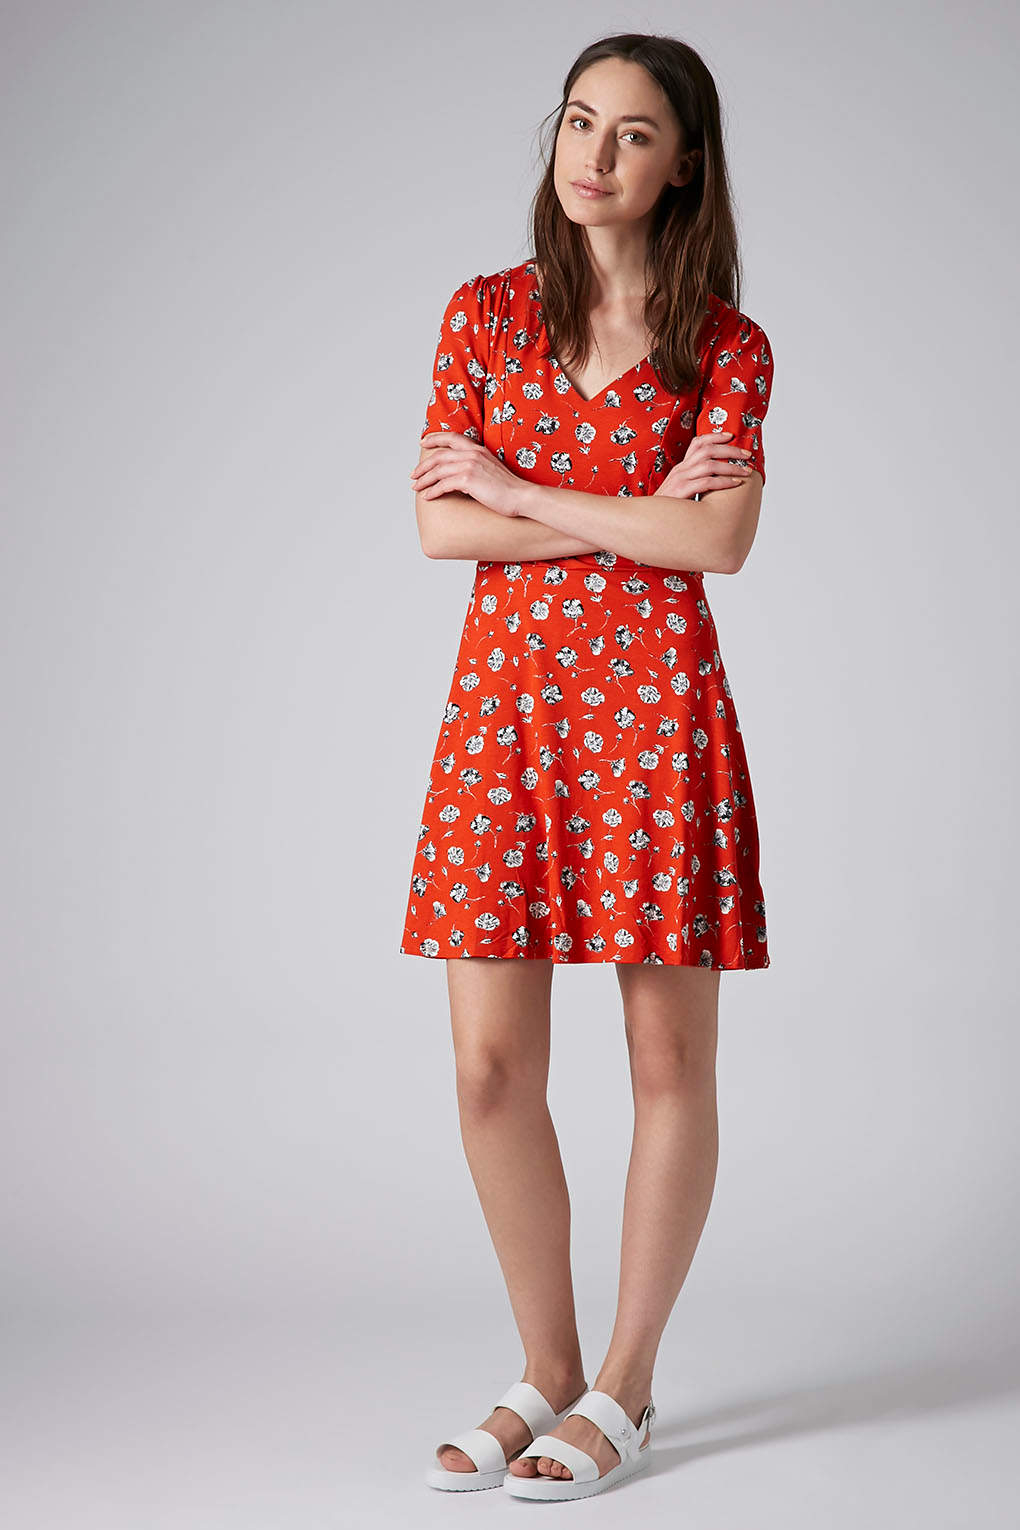 Lyst - Topshop Tall Pansy Floral Dress in Red